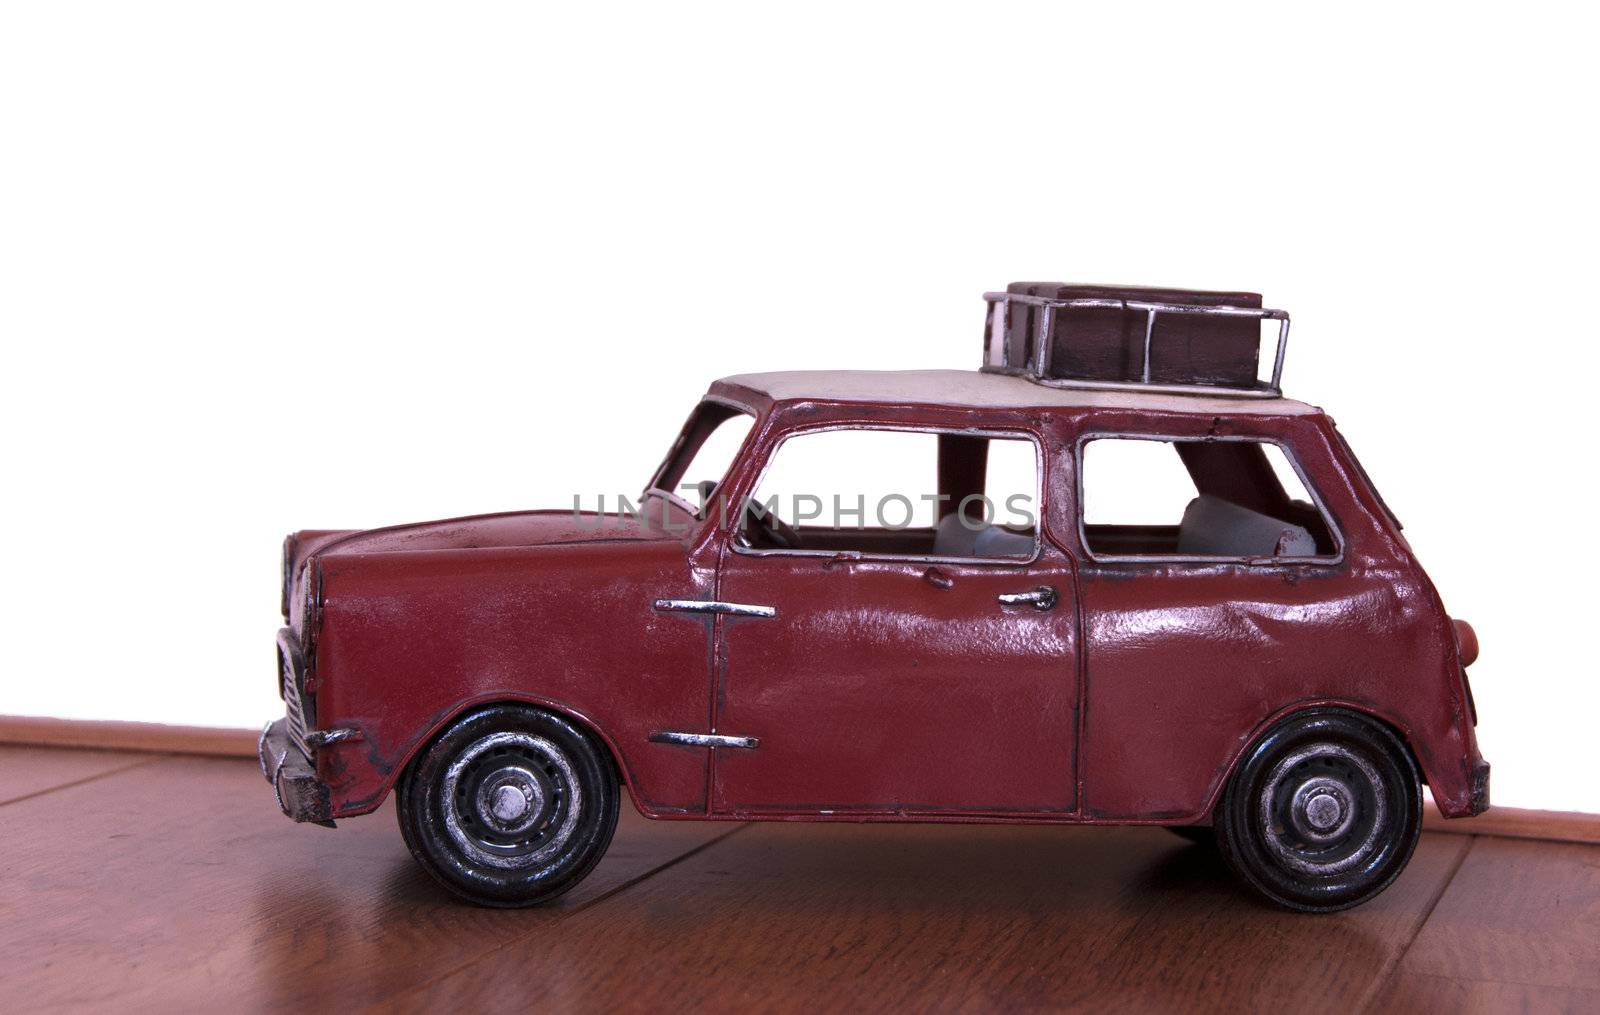 old metal car model with suitcase on the roof by compuinfoto